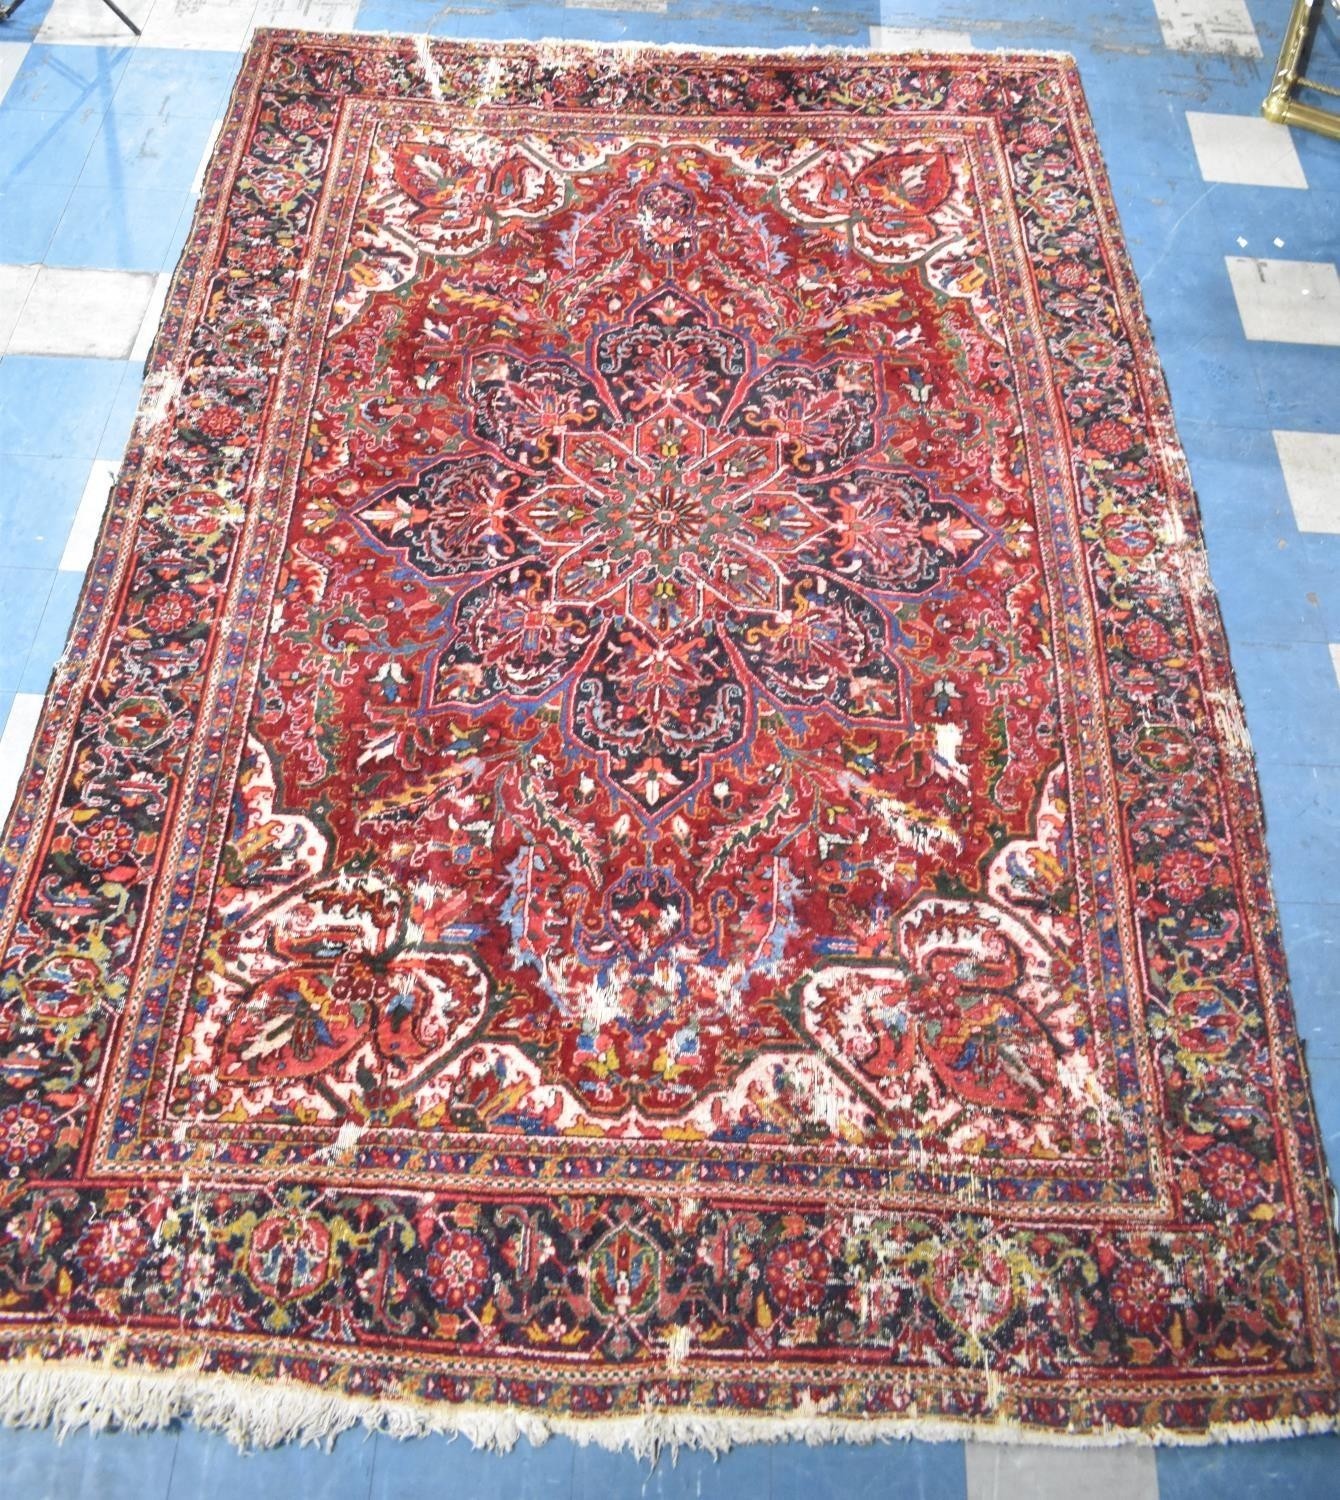 A Large Antique Persian Heriz Rug on Red Ground, Some Wear and Condition Issues, 340x240cms